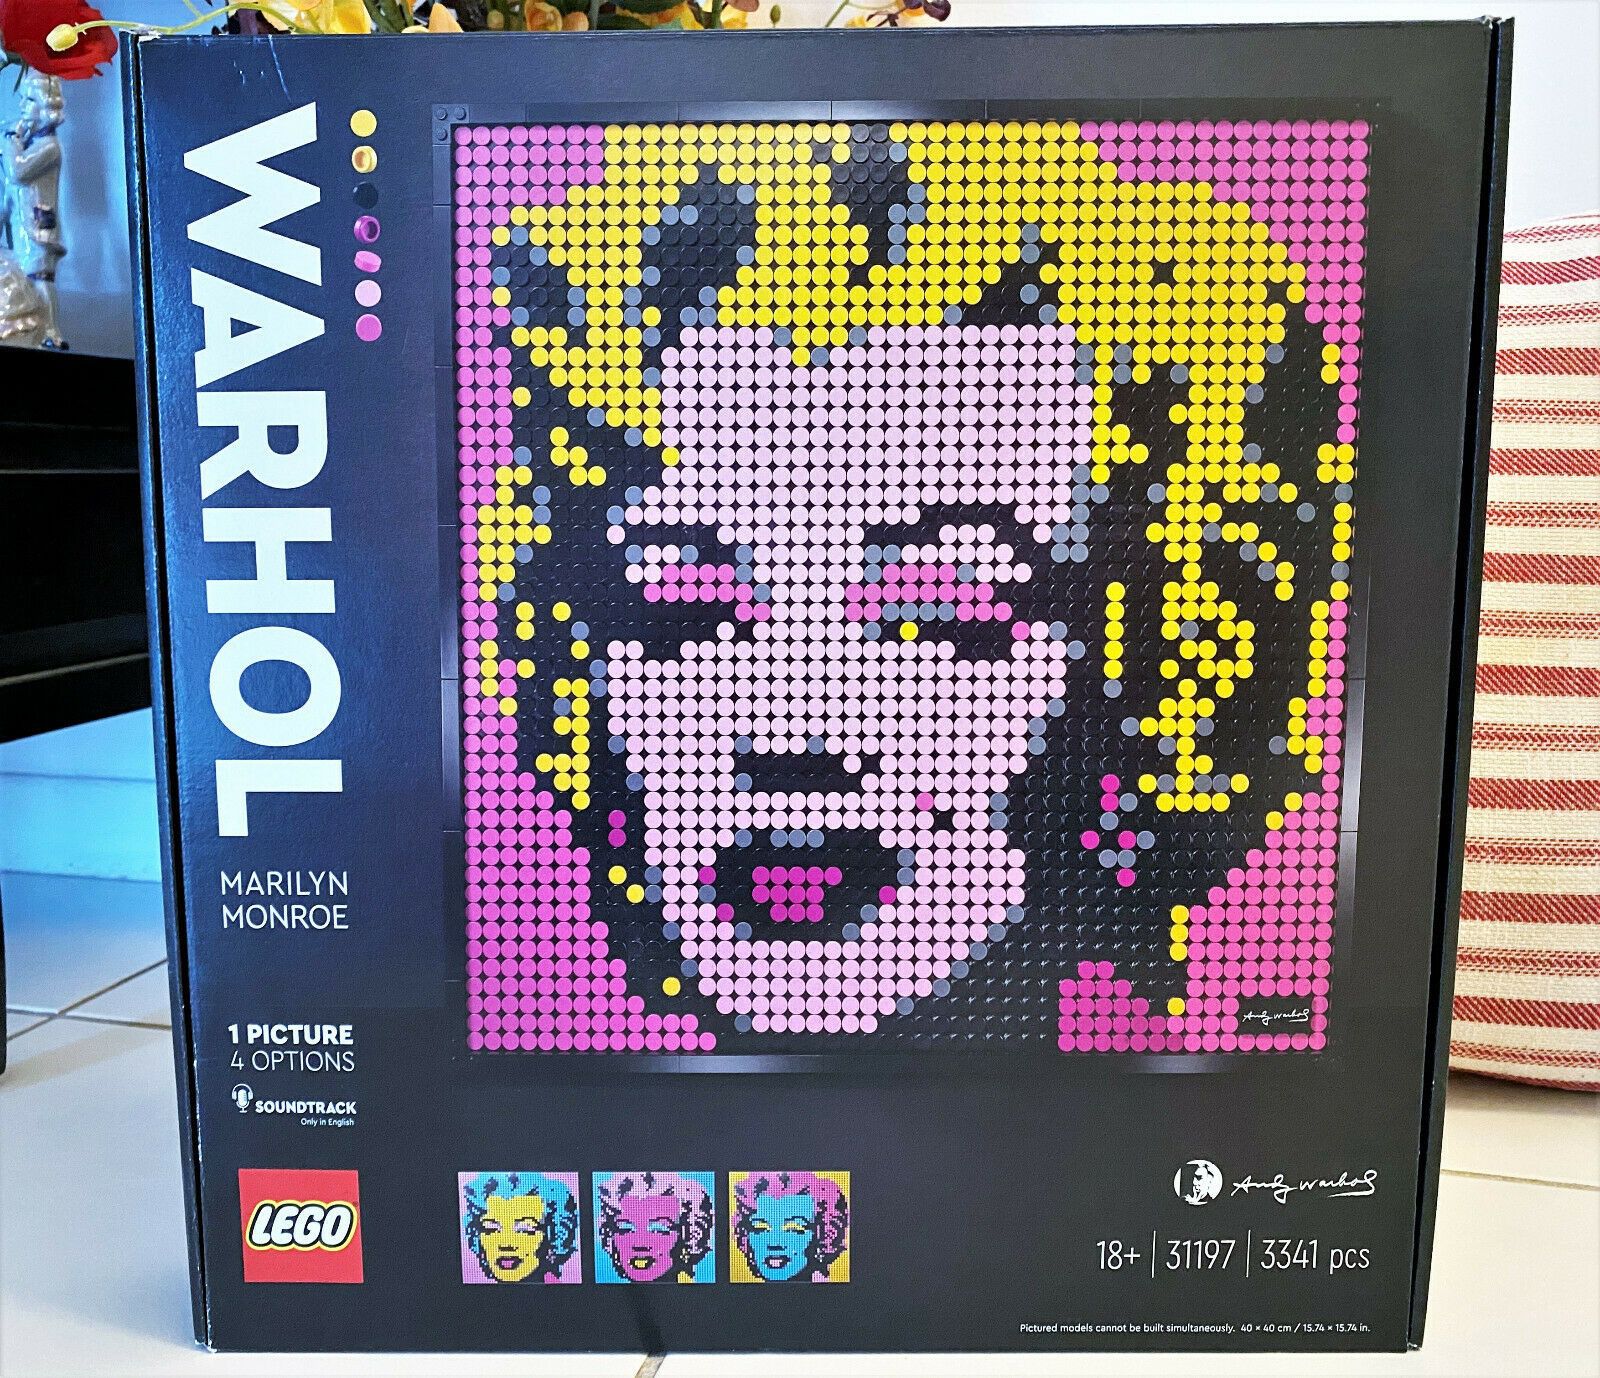 NEW LEGO Art Andy Warhol's Marilyn Monroe Collectible Canvas Art Set Building Kit for Adults 31197